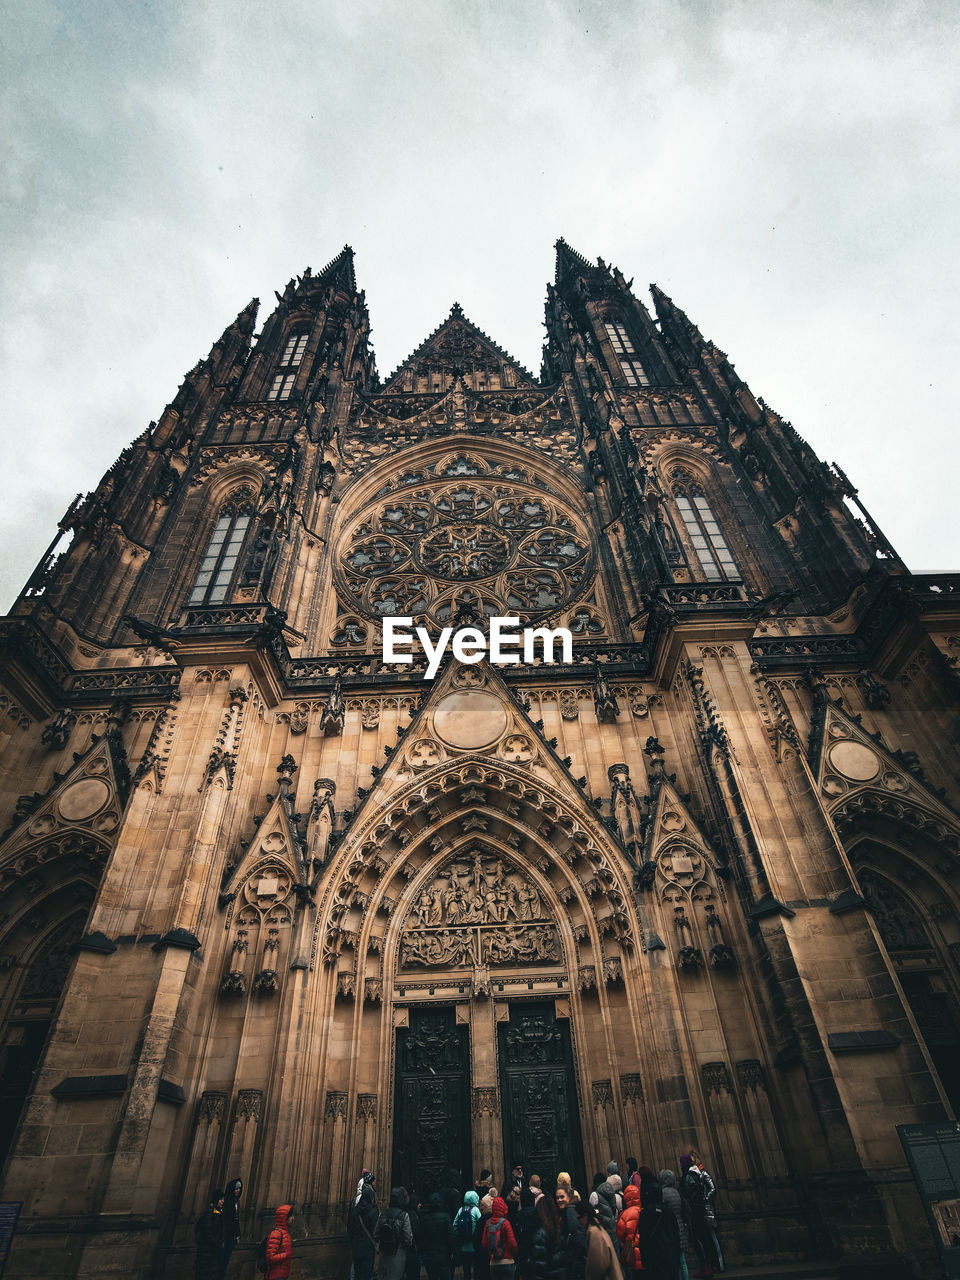 Divine grandeur the timeless beauty of prague's st. vitus cathedral